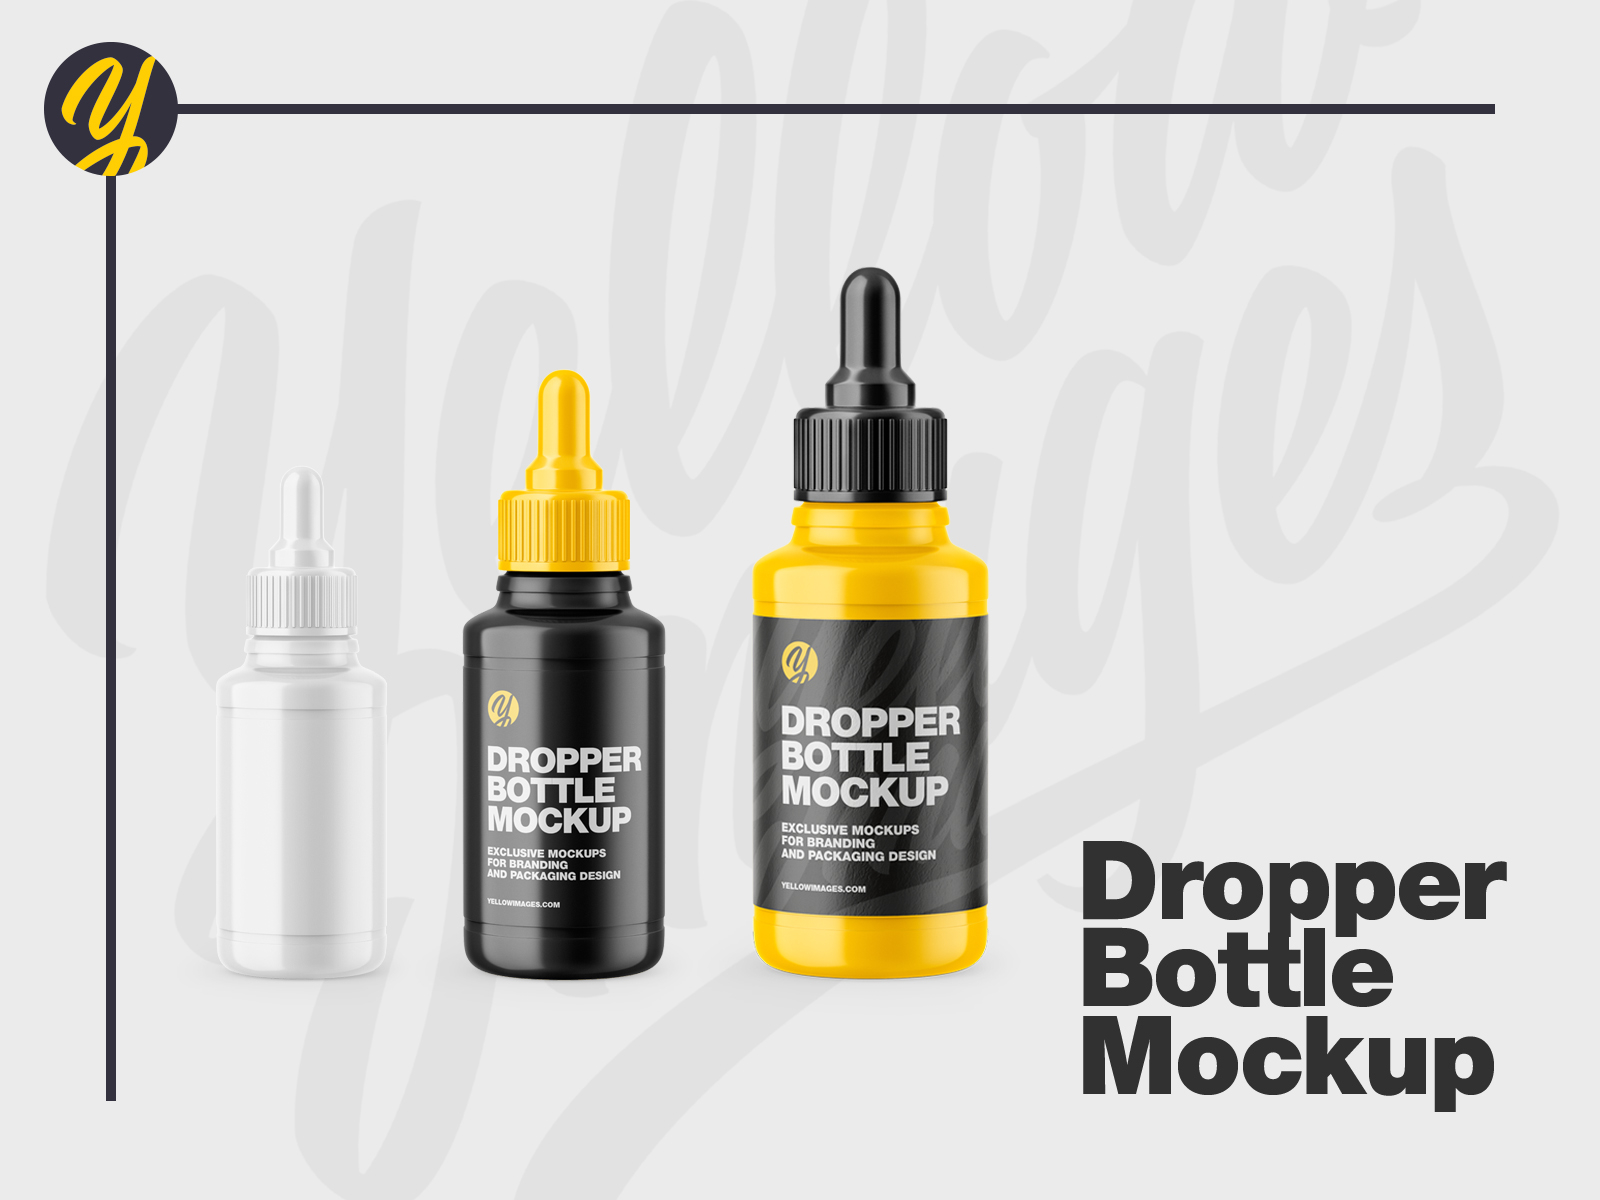 Download Dropper Bottle Mockup By Yellow Roma On Dribbble PSD Mockup Templates